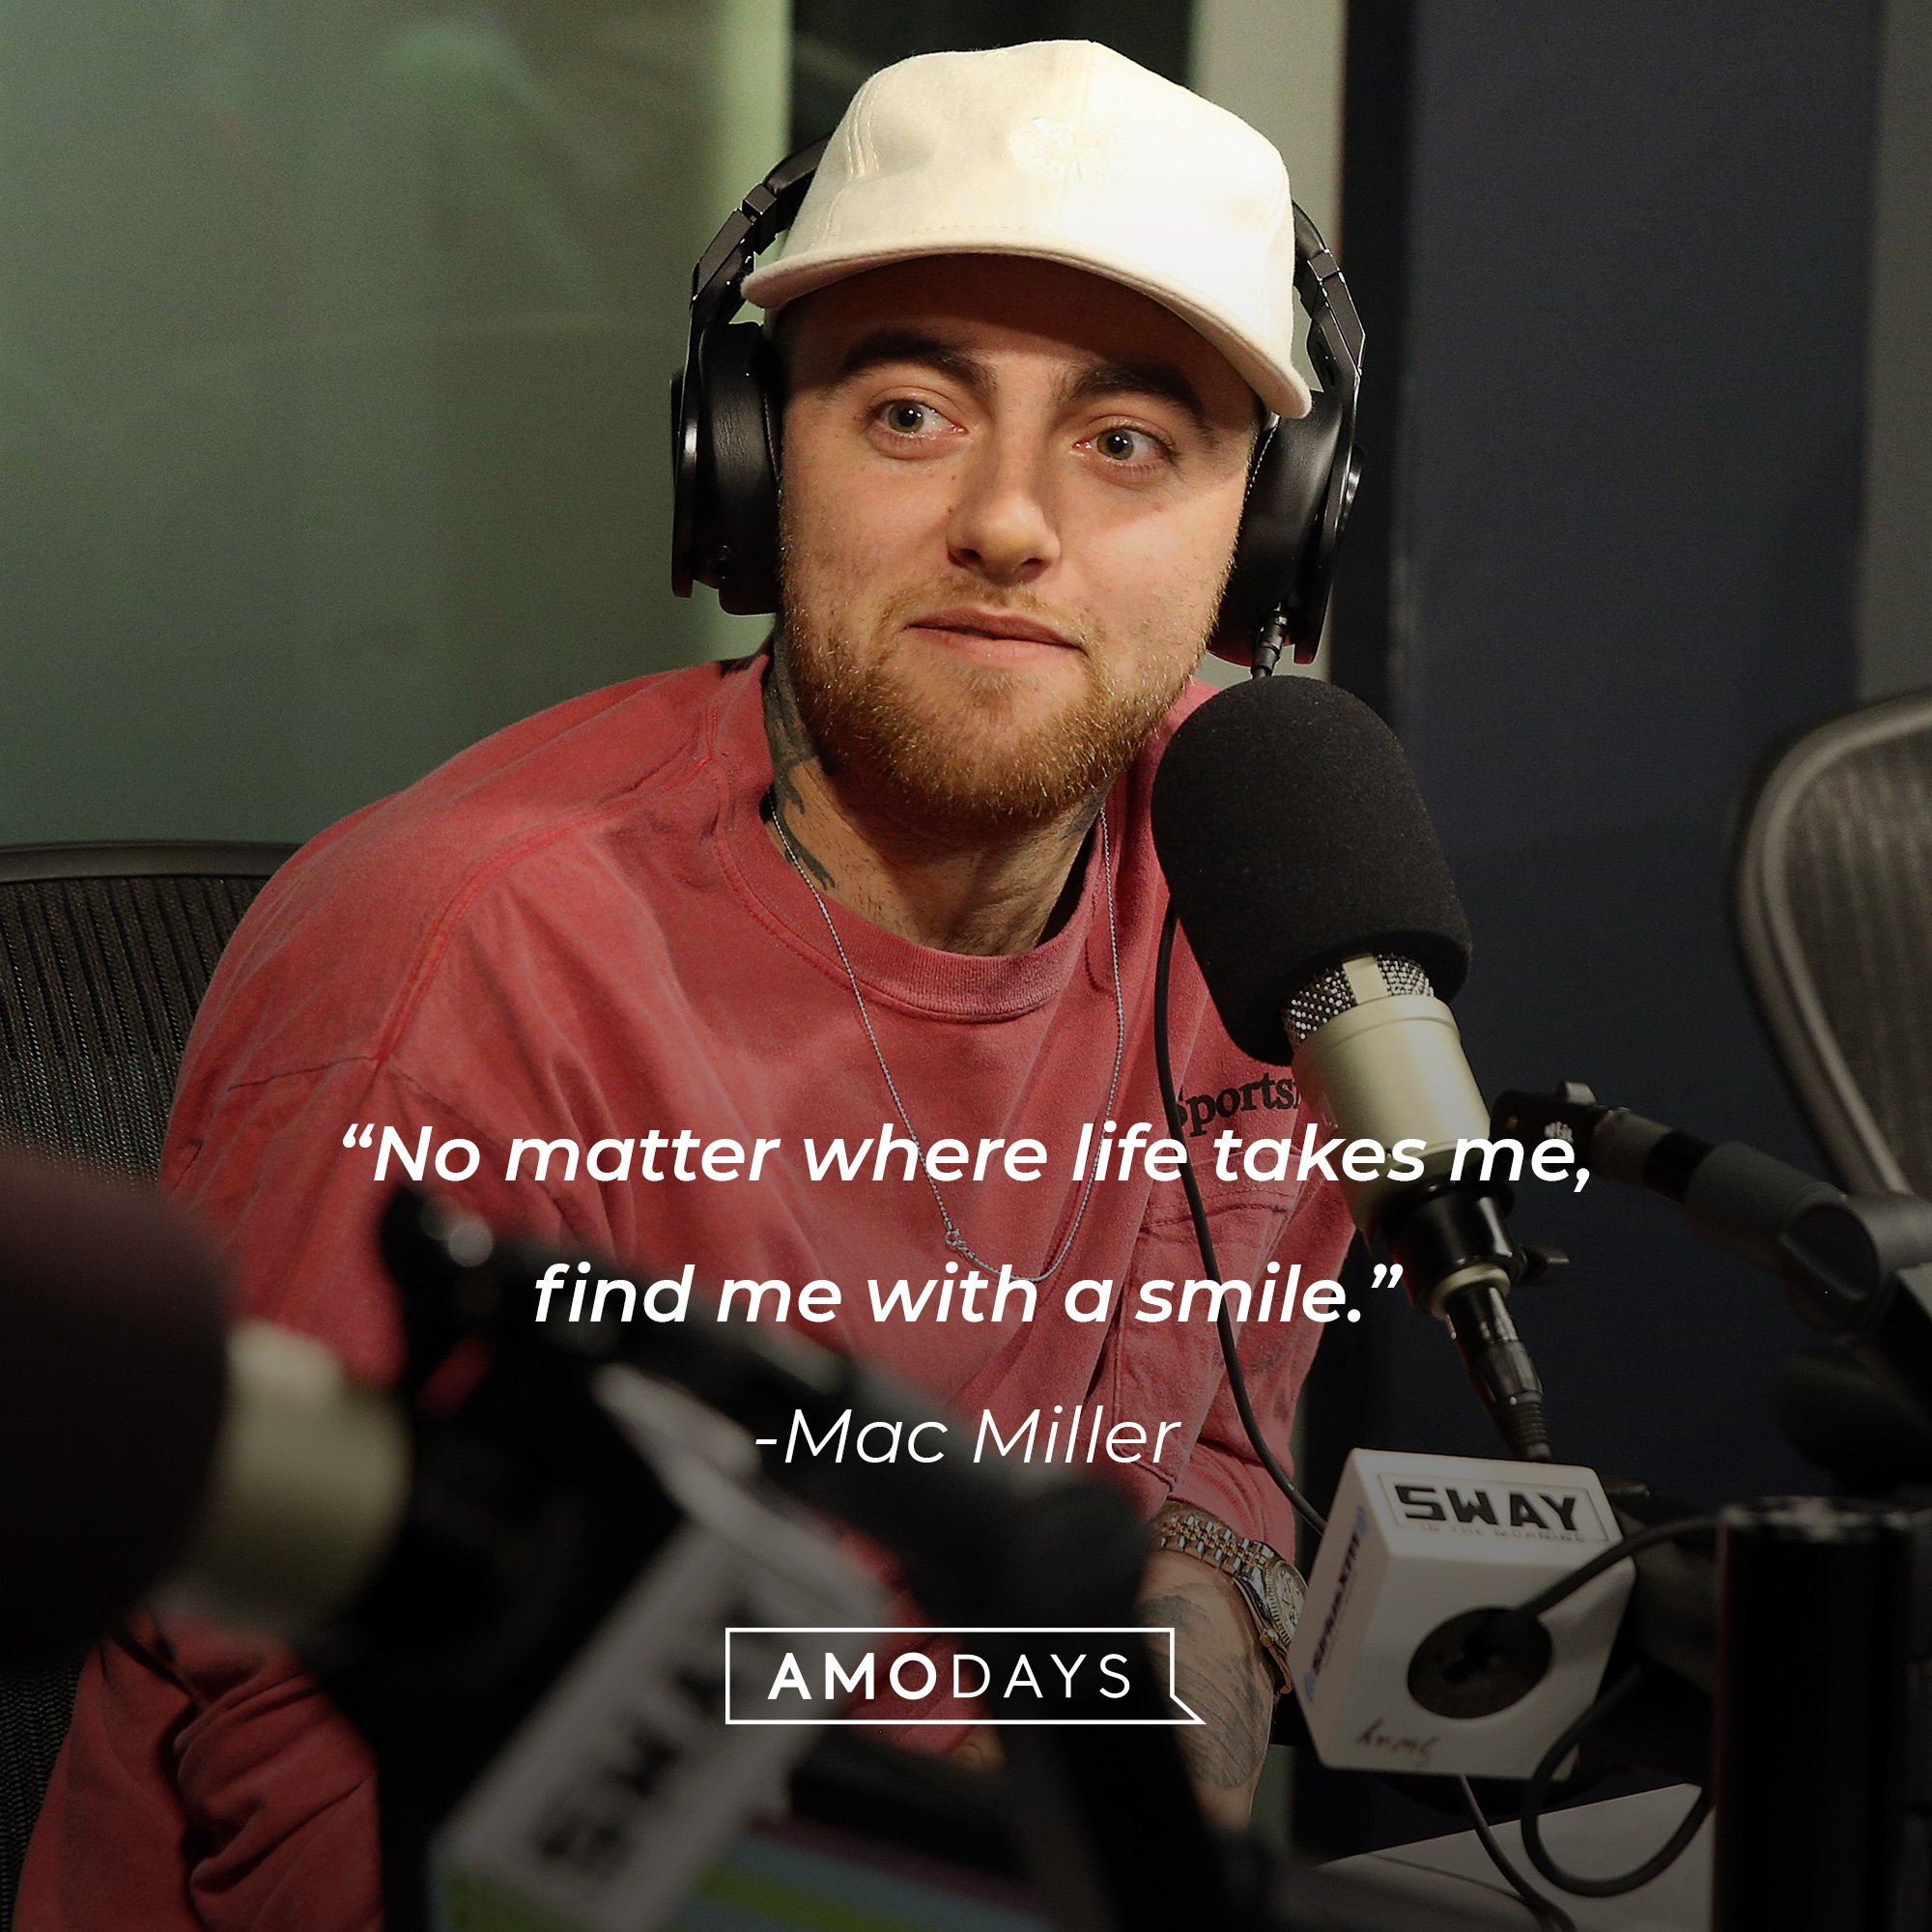 Mac Miller’s quote: “No matter where life takes me, find me with a smile.”  │Image: AmoDays